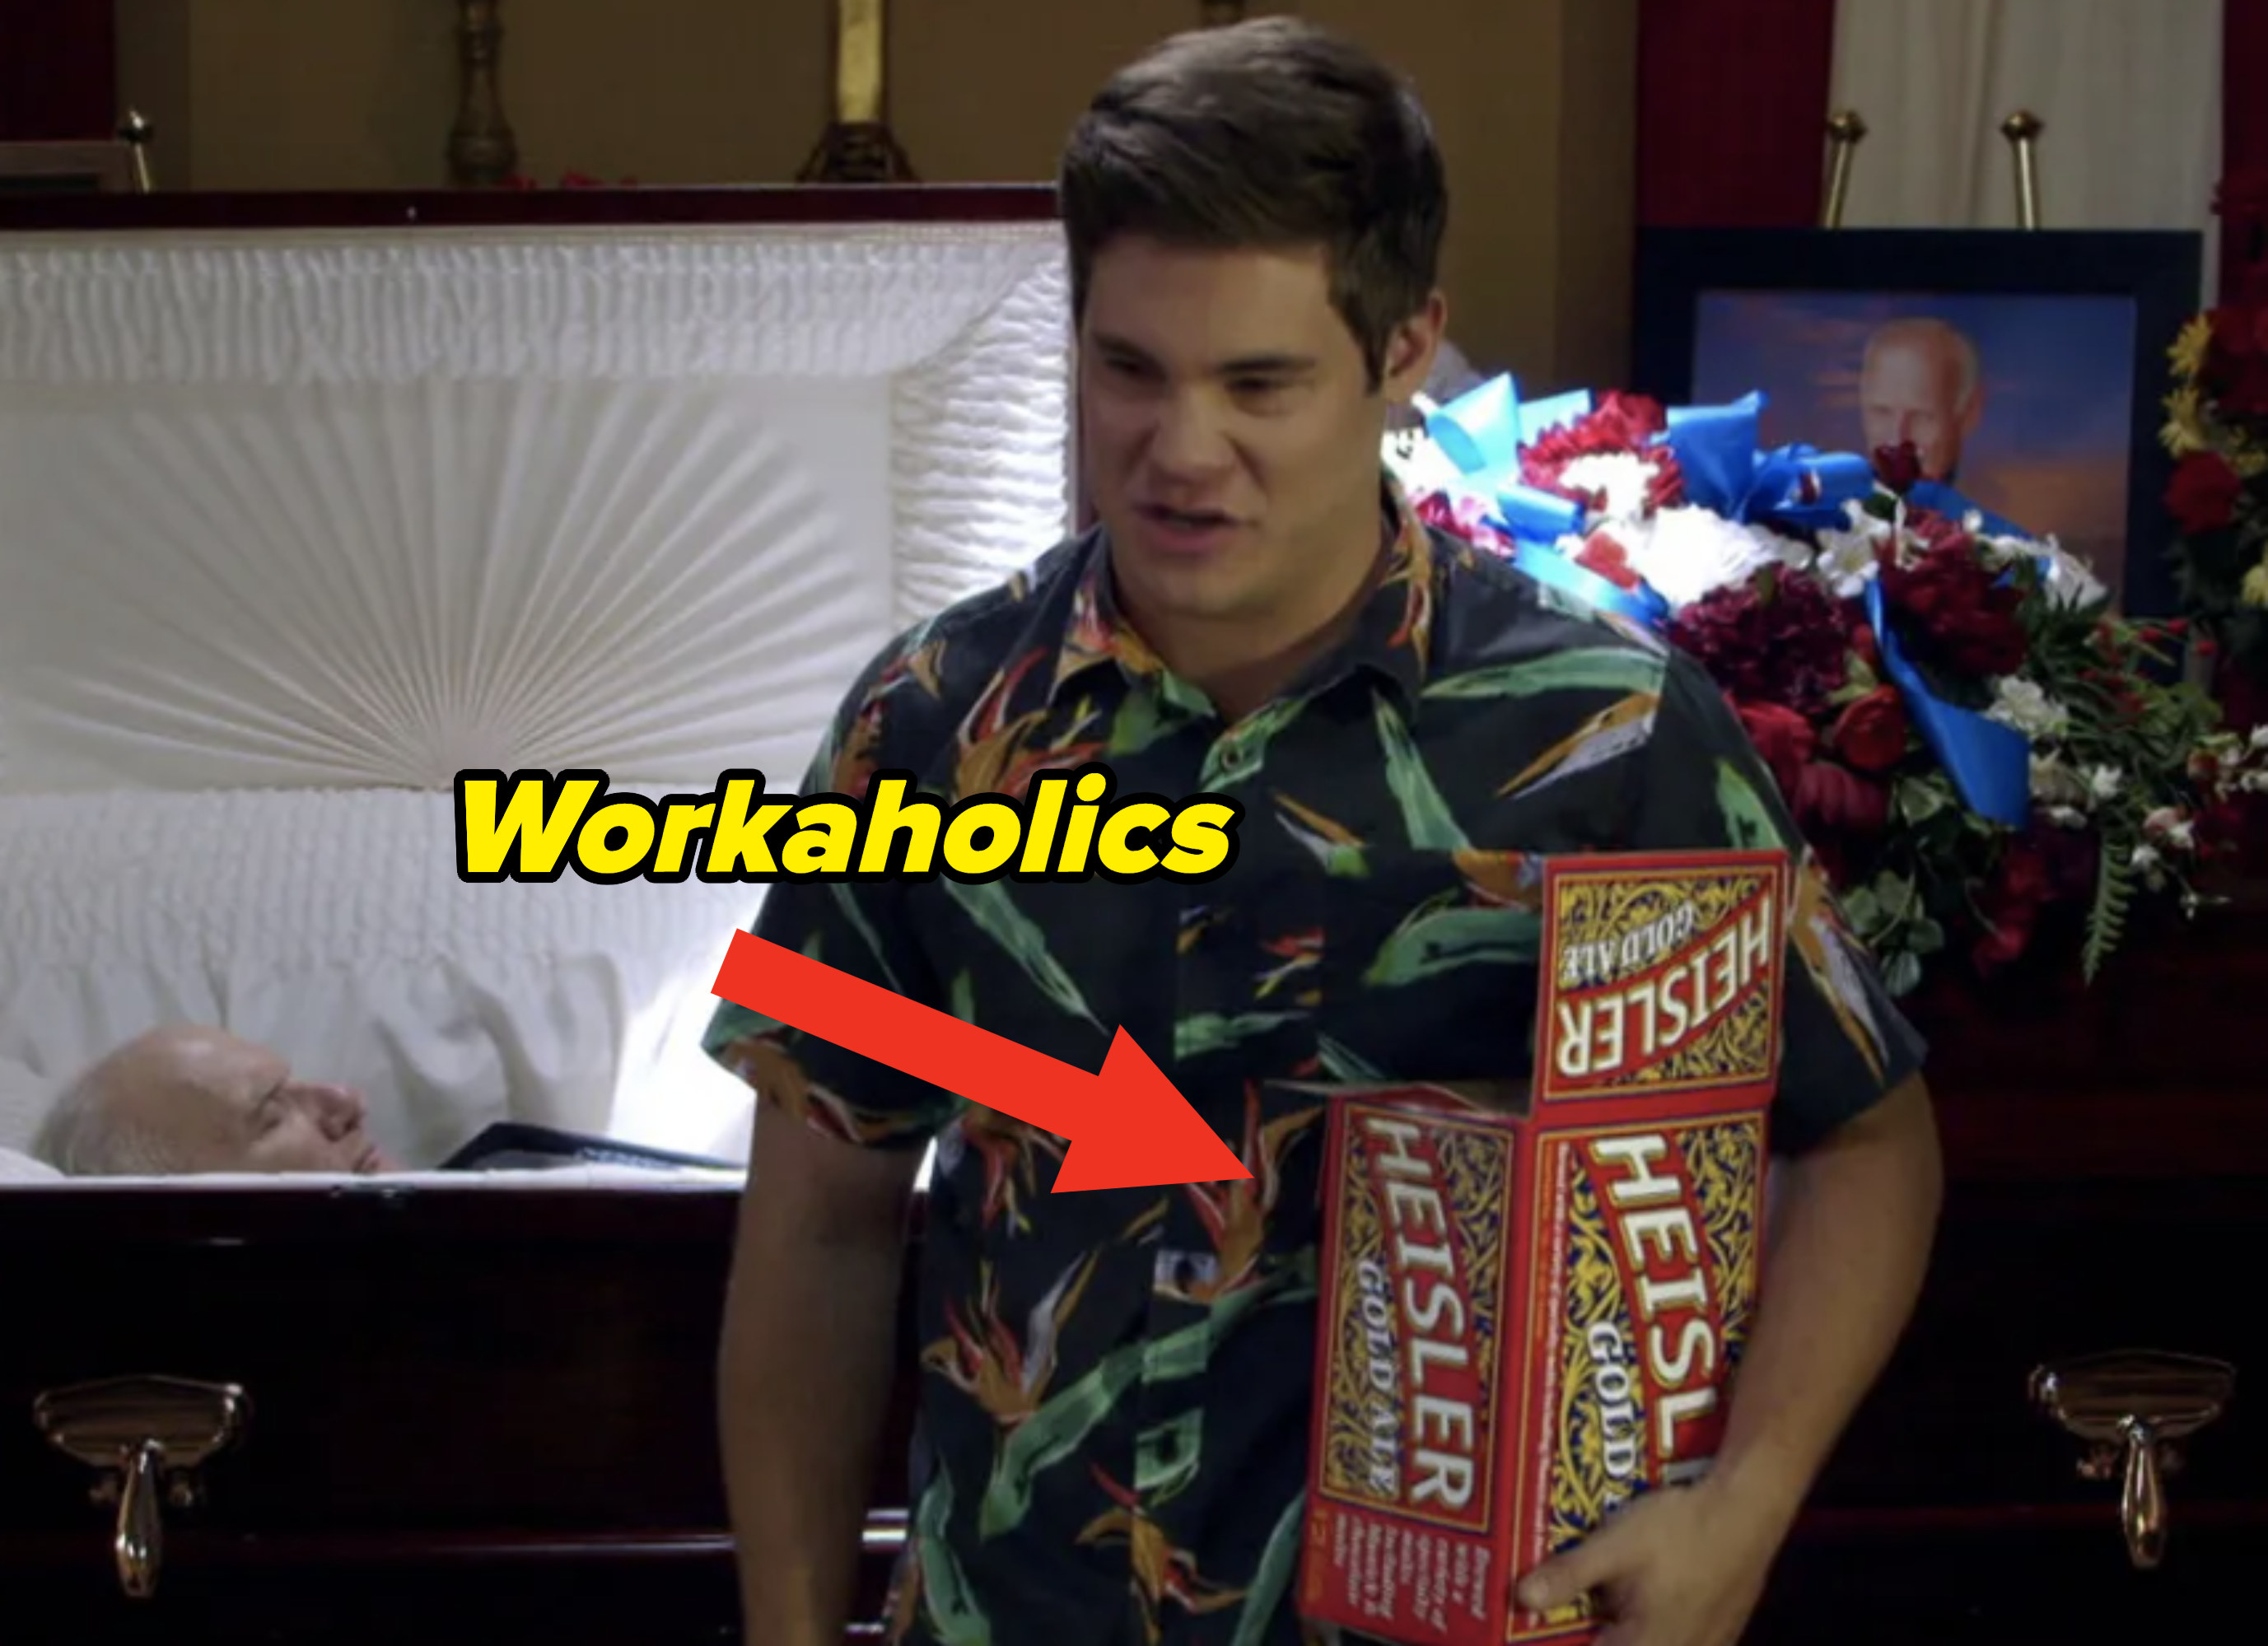 a case of the beer workaholics